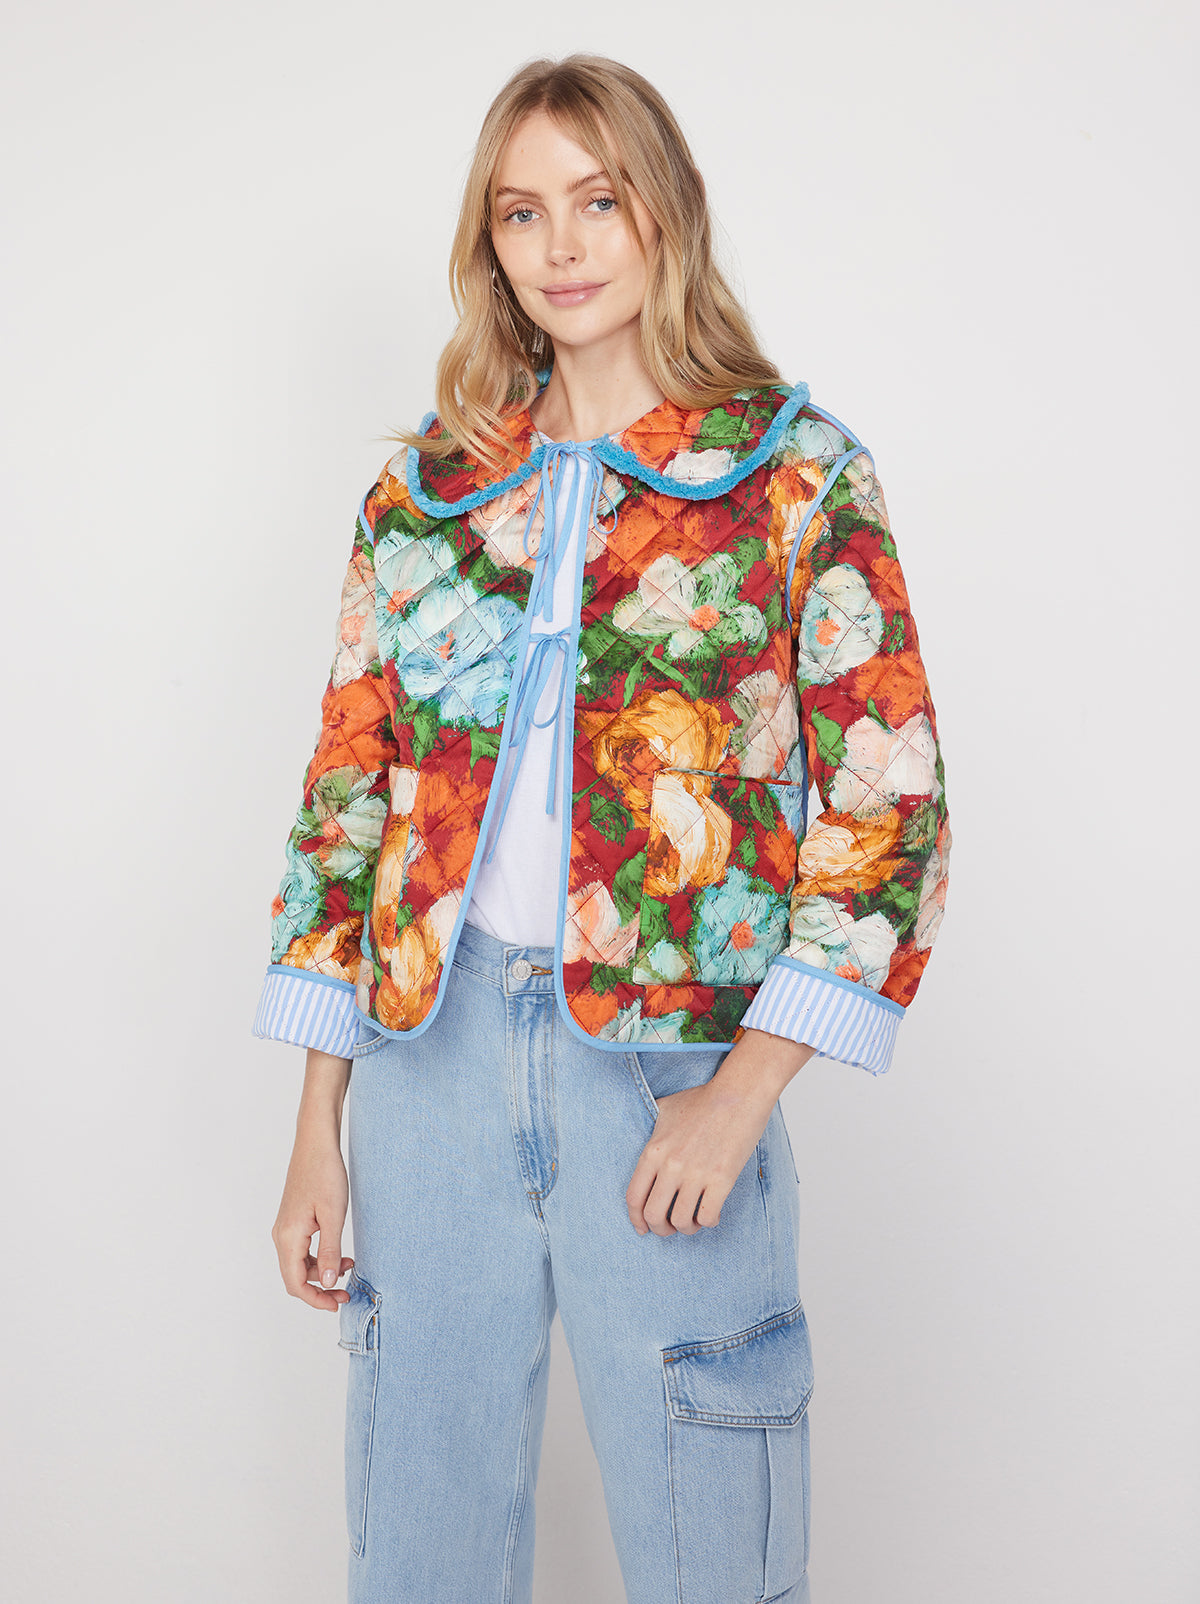 Piper Blue Impressionist Floral Print Reversible Quilted Jacket